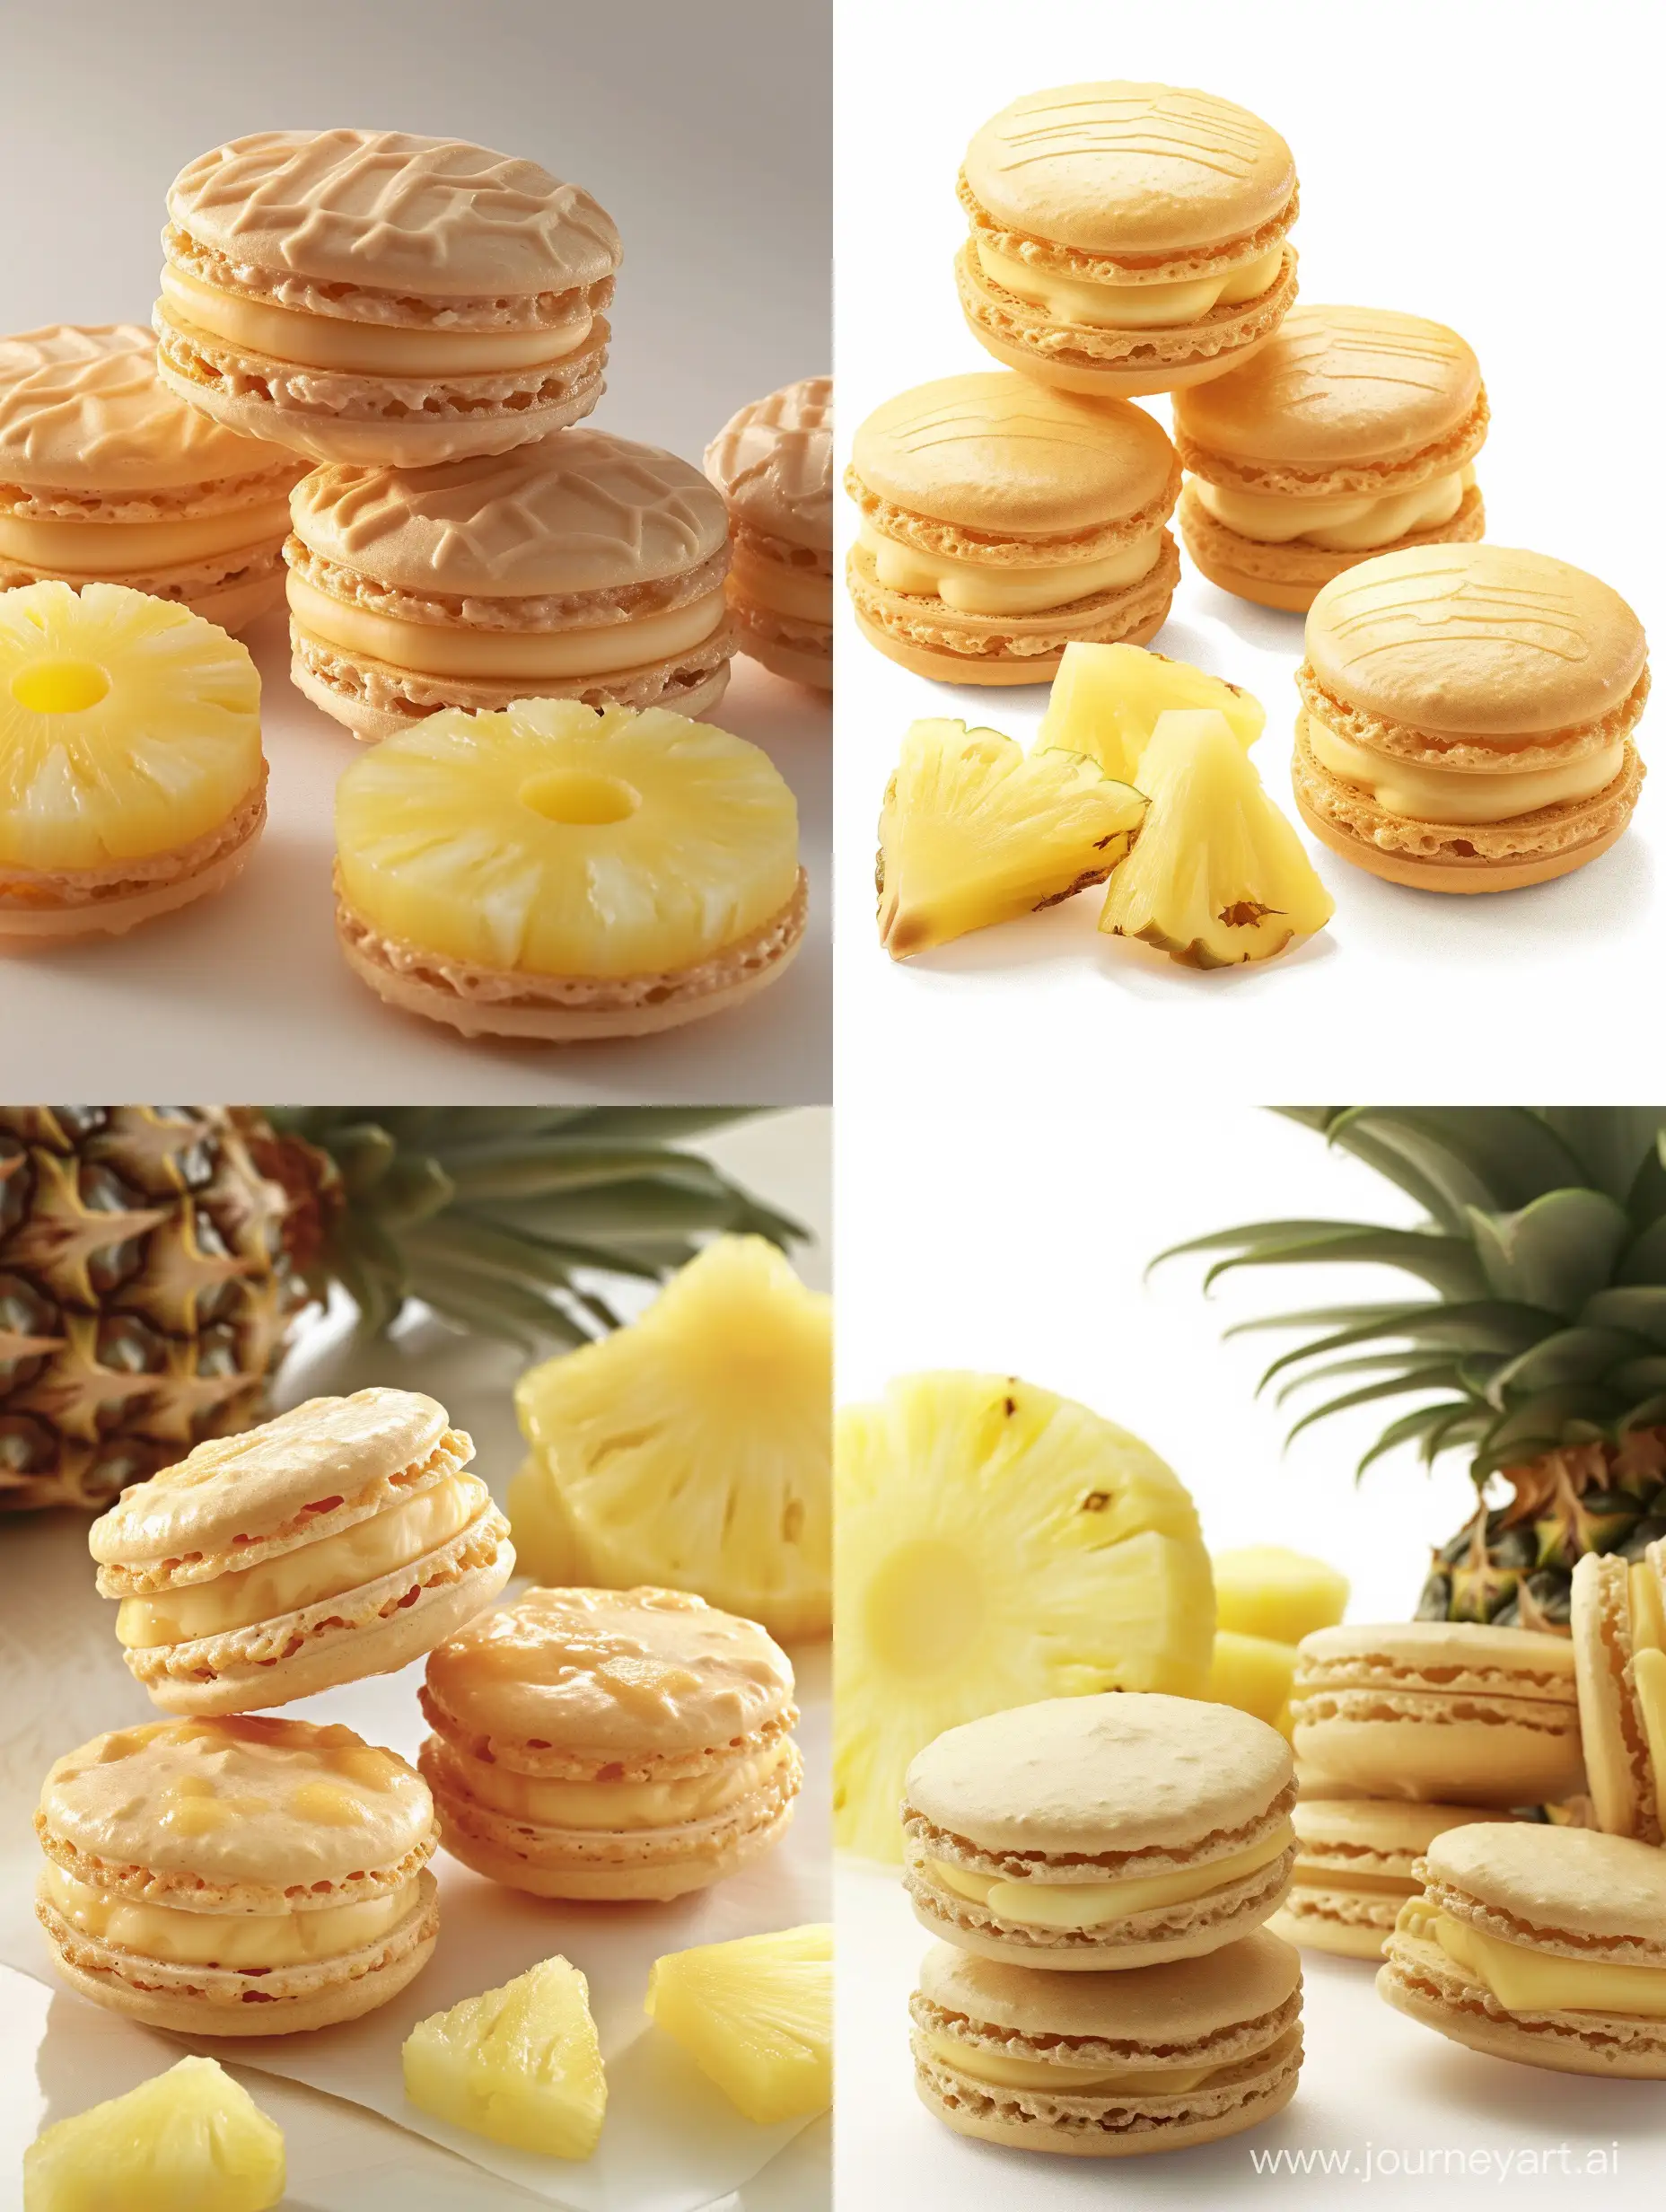 Delicious-Macaroon-Pineapple-and-Cheese-Flavored-Food-Display